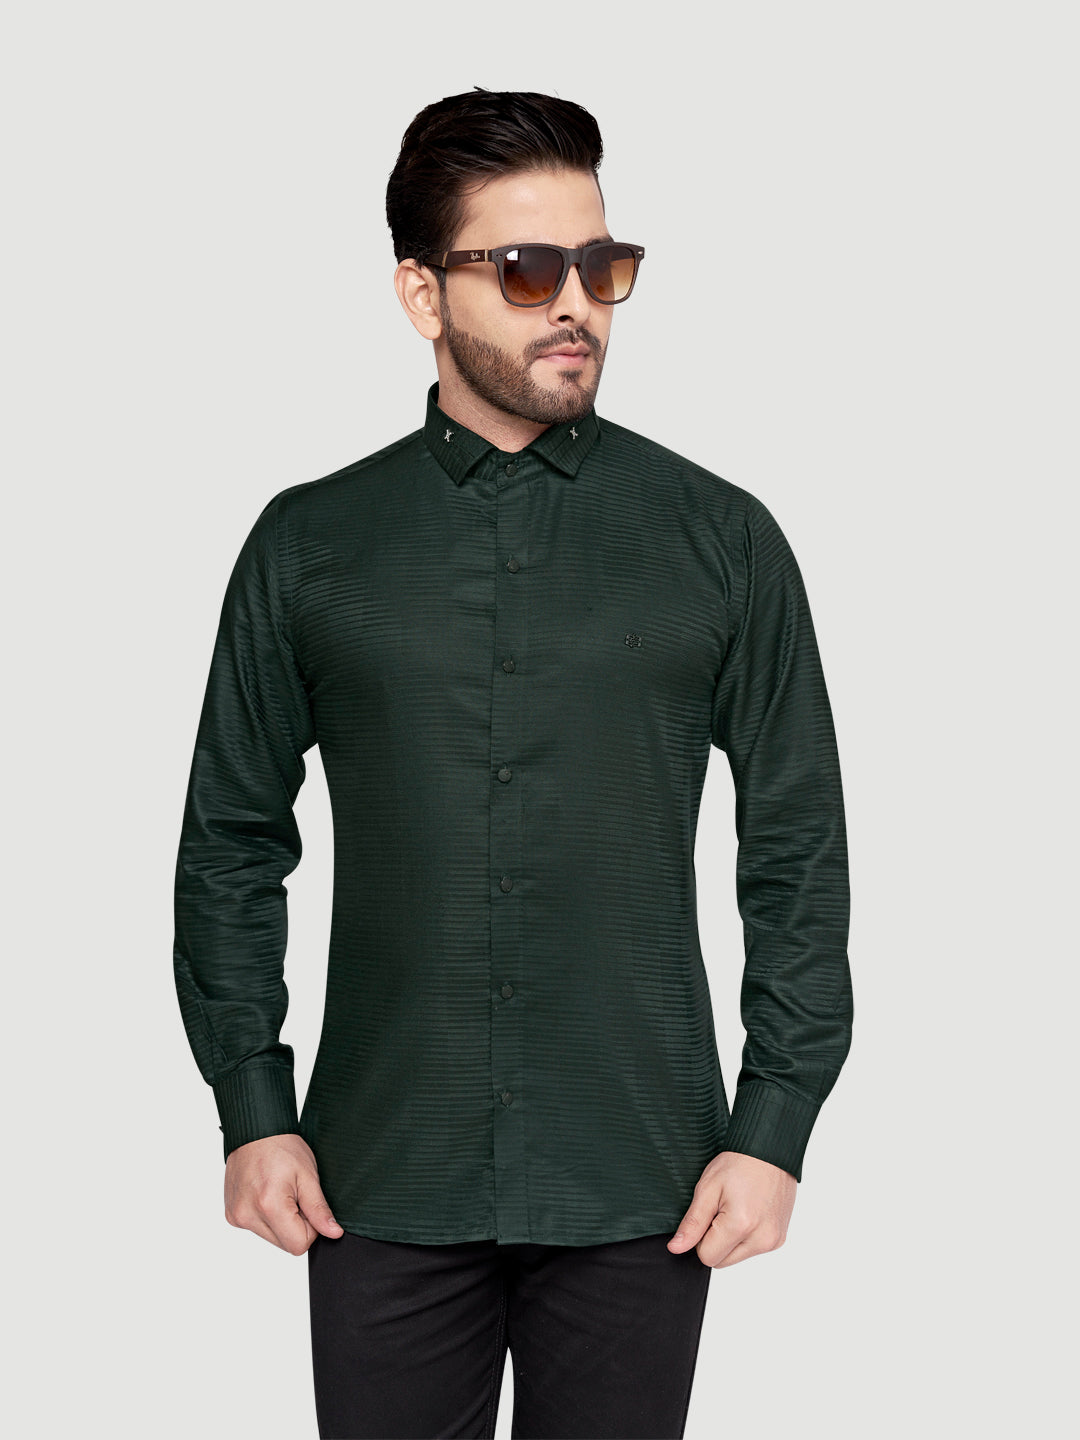 Black and White Shirts Designer Shimmer Shirt with Metal Broach Green